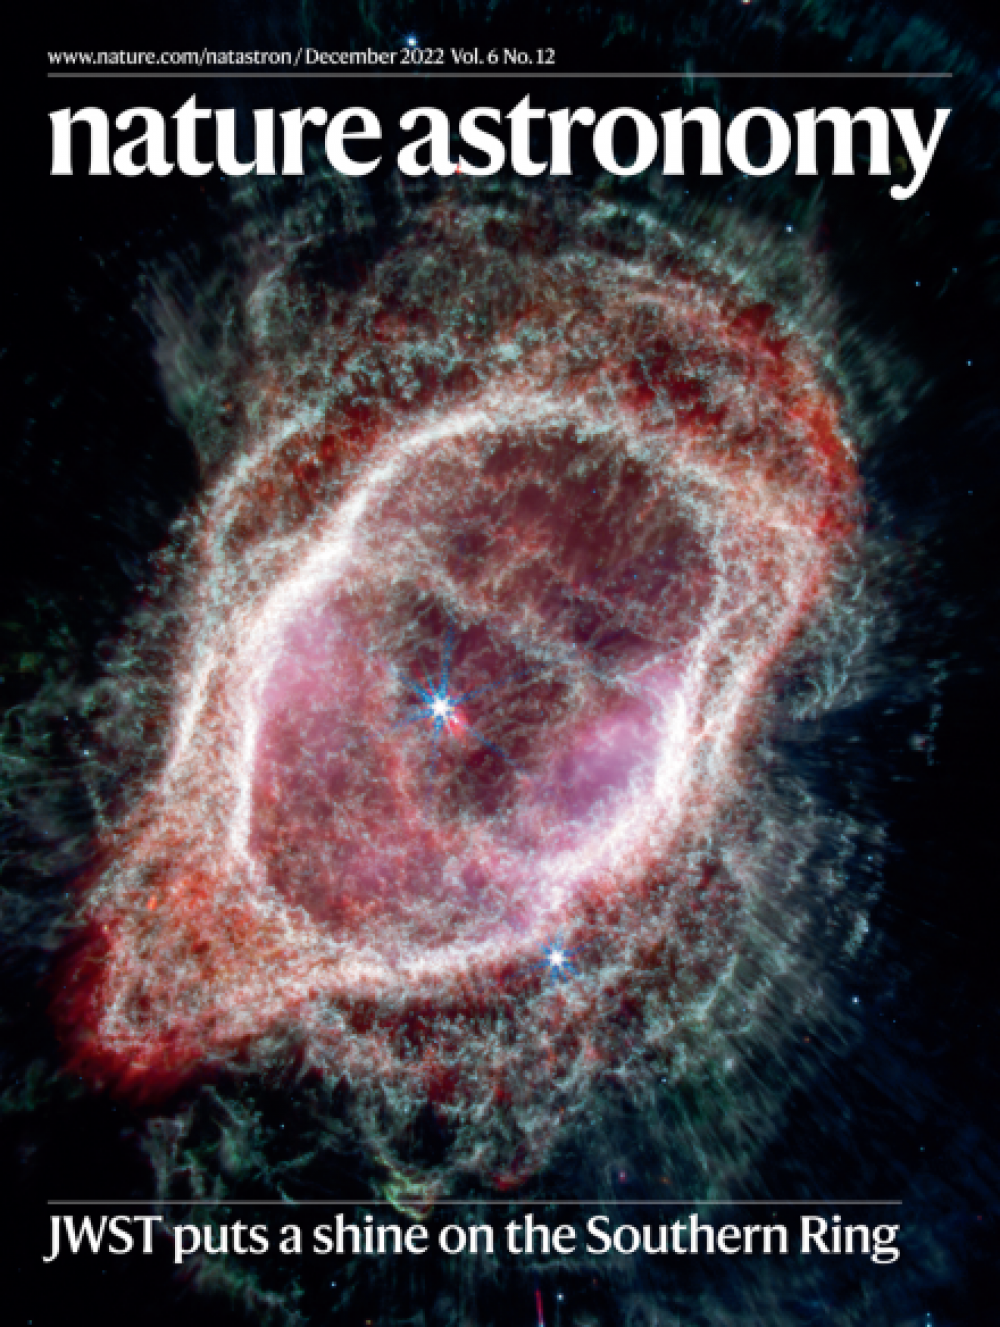 Study of Prof. Quentin Parker and International Astrophysicists published as cover study on Nature Astronomy